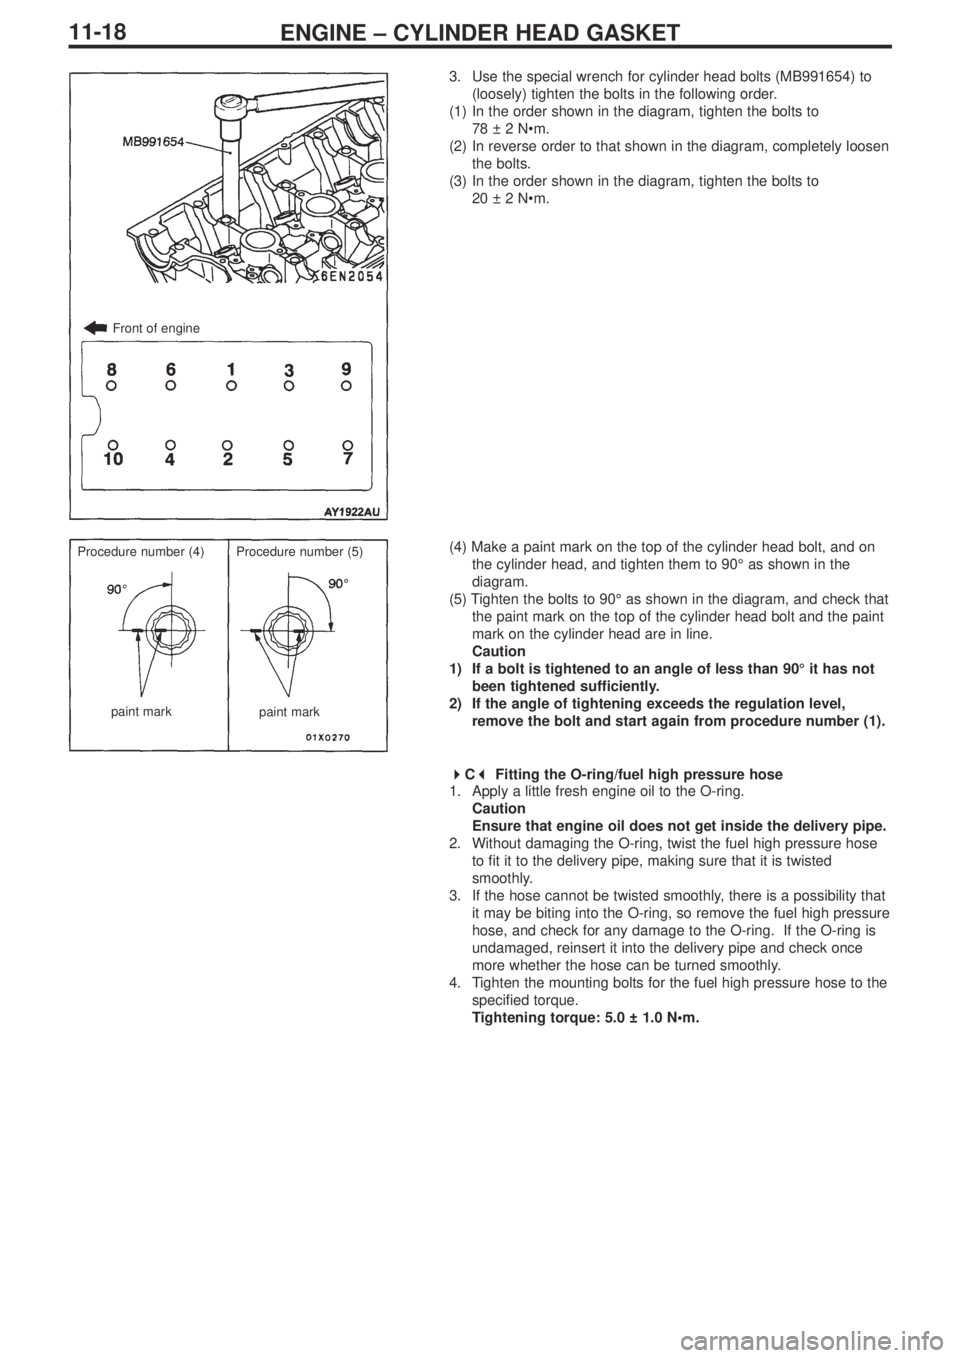 MITSUBISHI LANCER EVOLUTION IX 2005  Workshop Manual ENGINE – CYLINDER HEAD GASKET11-18
3. Use the special wrench for cylinder head bolts (MB991654) to
(loosely) tighten the bolts in the following order.
(1) In the order shown in the diagram, tighten 